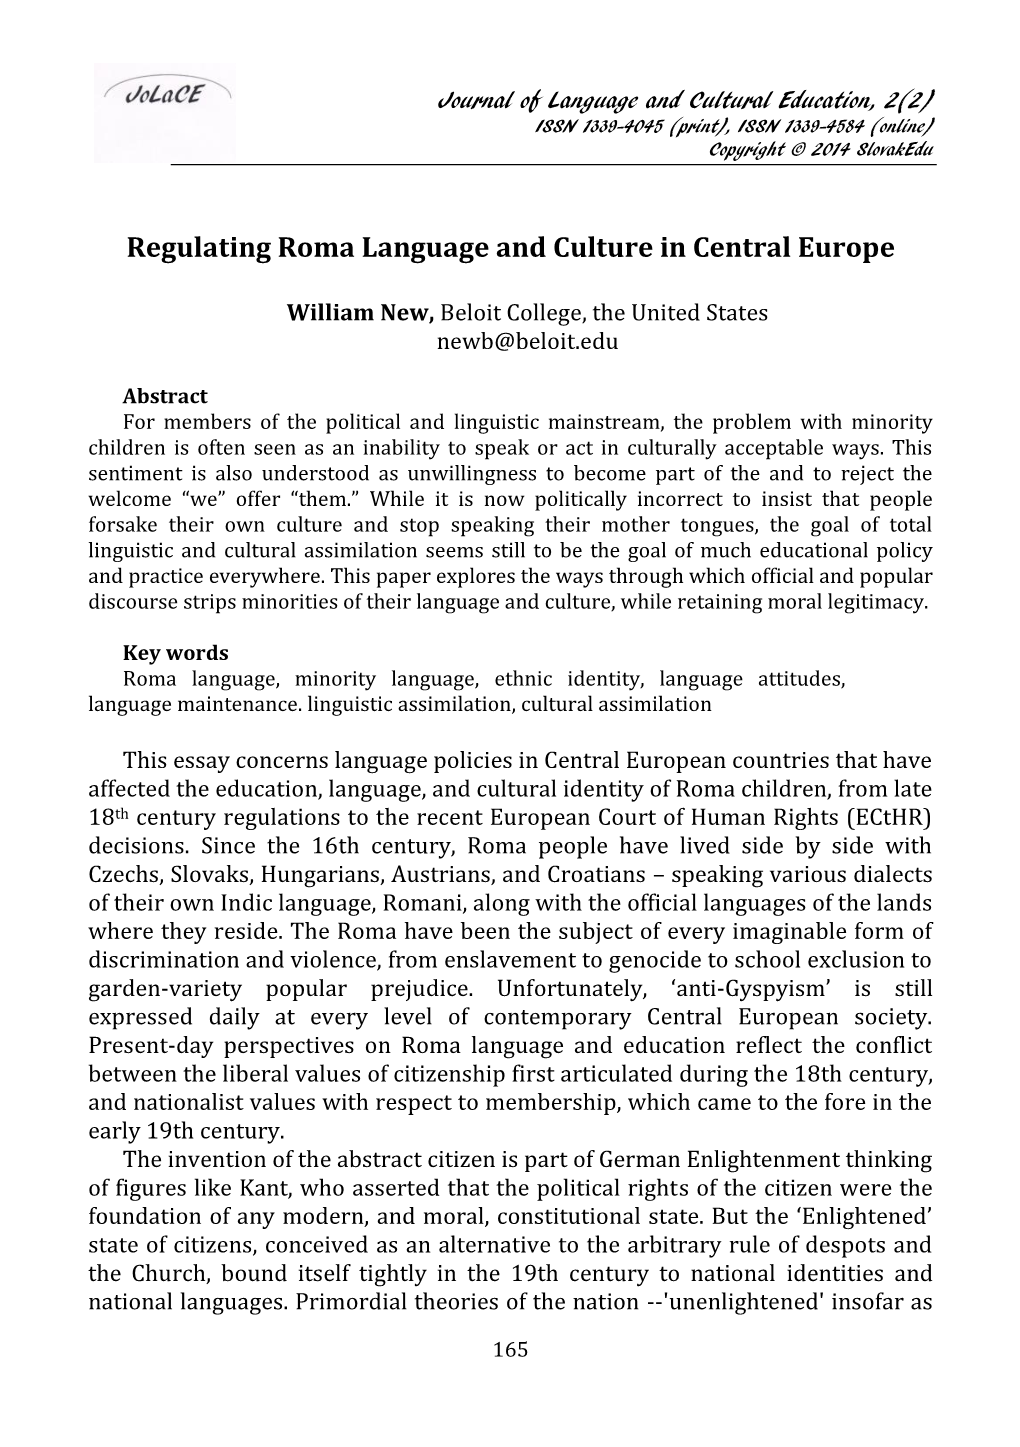 Regulating Roma Language and Culture in Central Europe